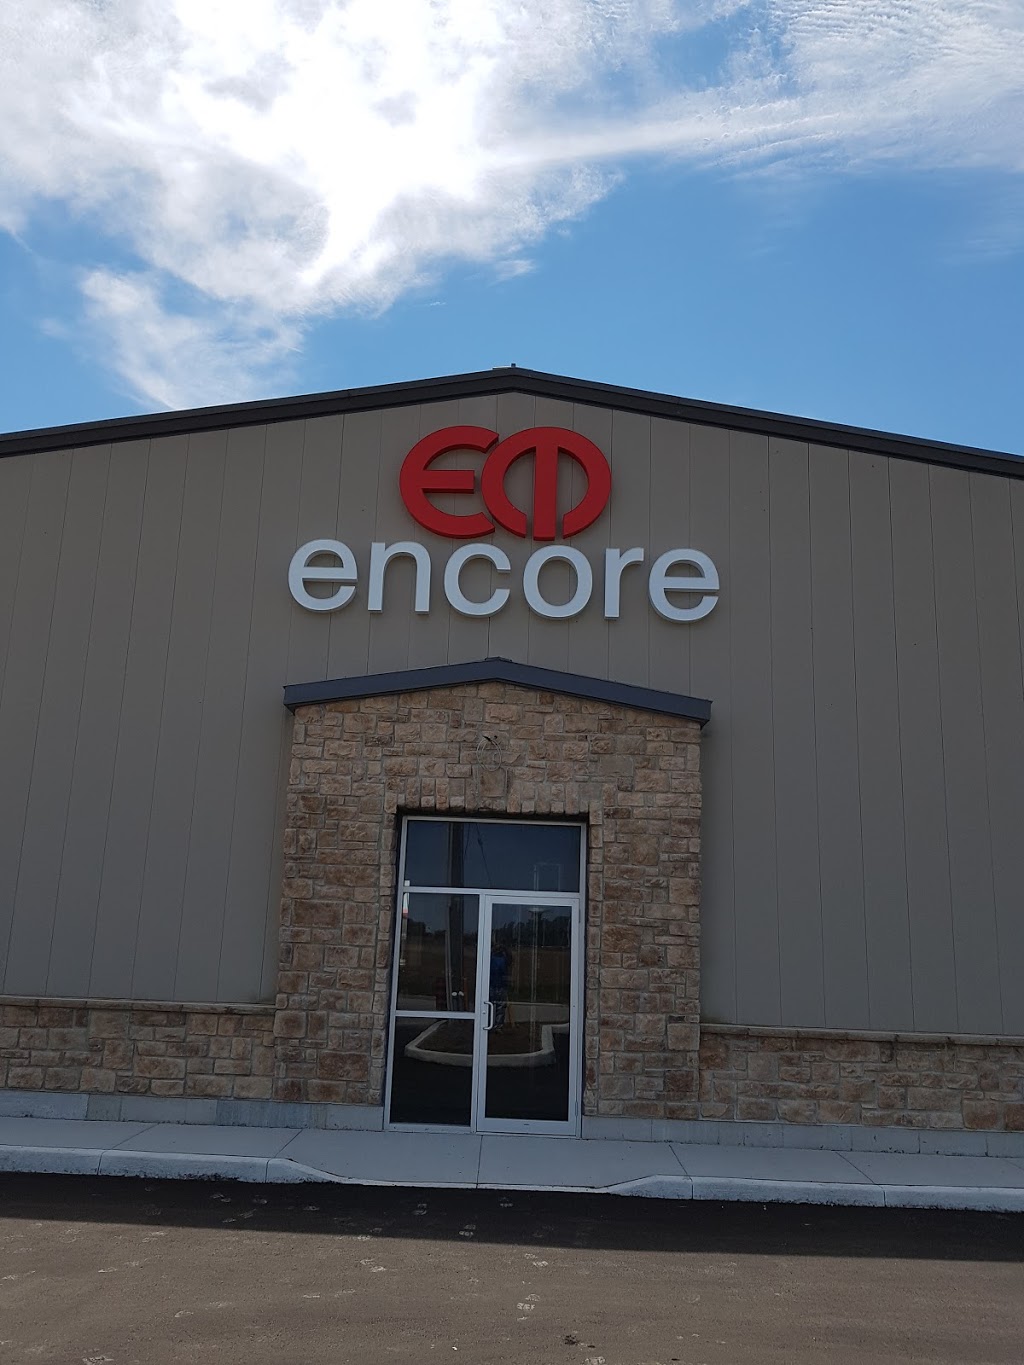 Encore Mechanical & Building Services Inc. | electrician | 13225 Jamsyl Dr, Windsor, ON N8N 2L9, Canada | 5199793572 OR +1 519-979-3572